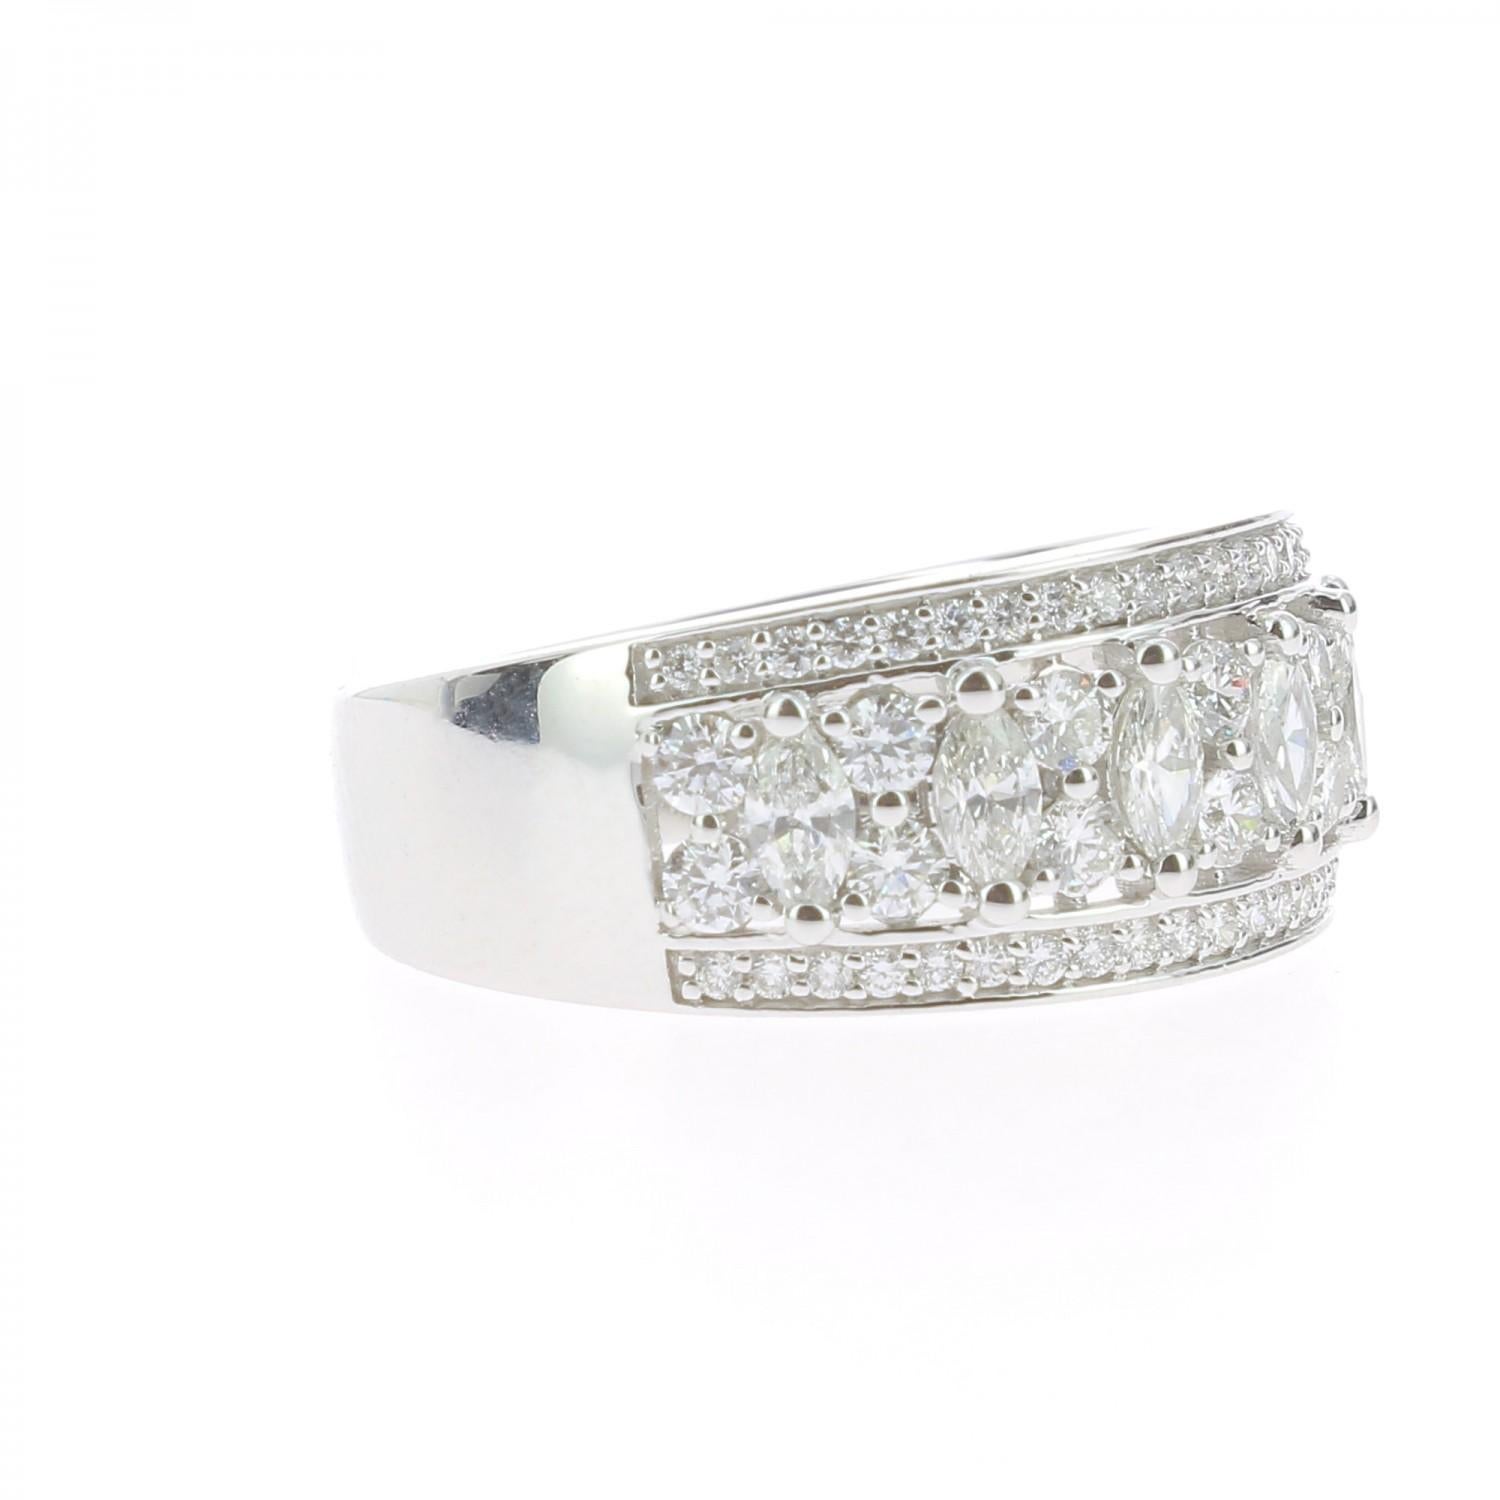 The Lace Ring is a unique and trendy ring set with 1,15 carat.
The ring is paved with brilliants cut diamonds weighing 0.47 Carat and Marquise cut diamonds weighing 0.68 Carat.
Craft in 18K White Gold weighing 6.24 Grams, the ring is set with GVS